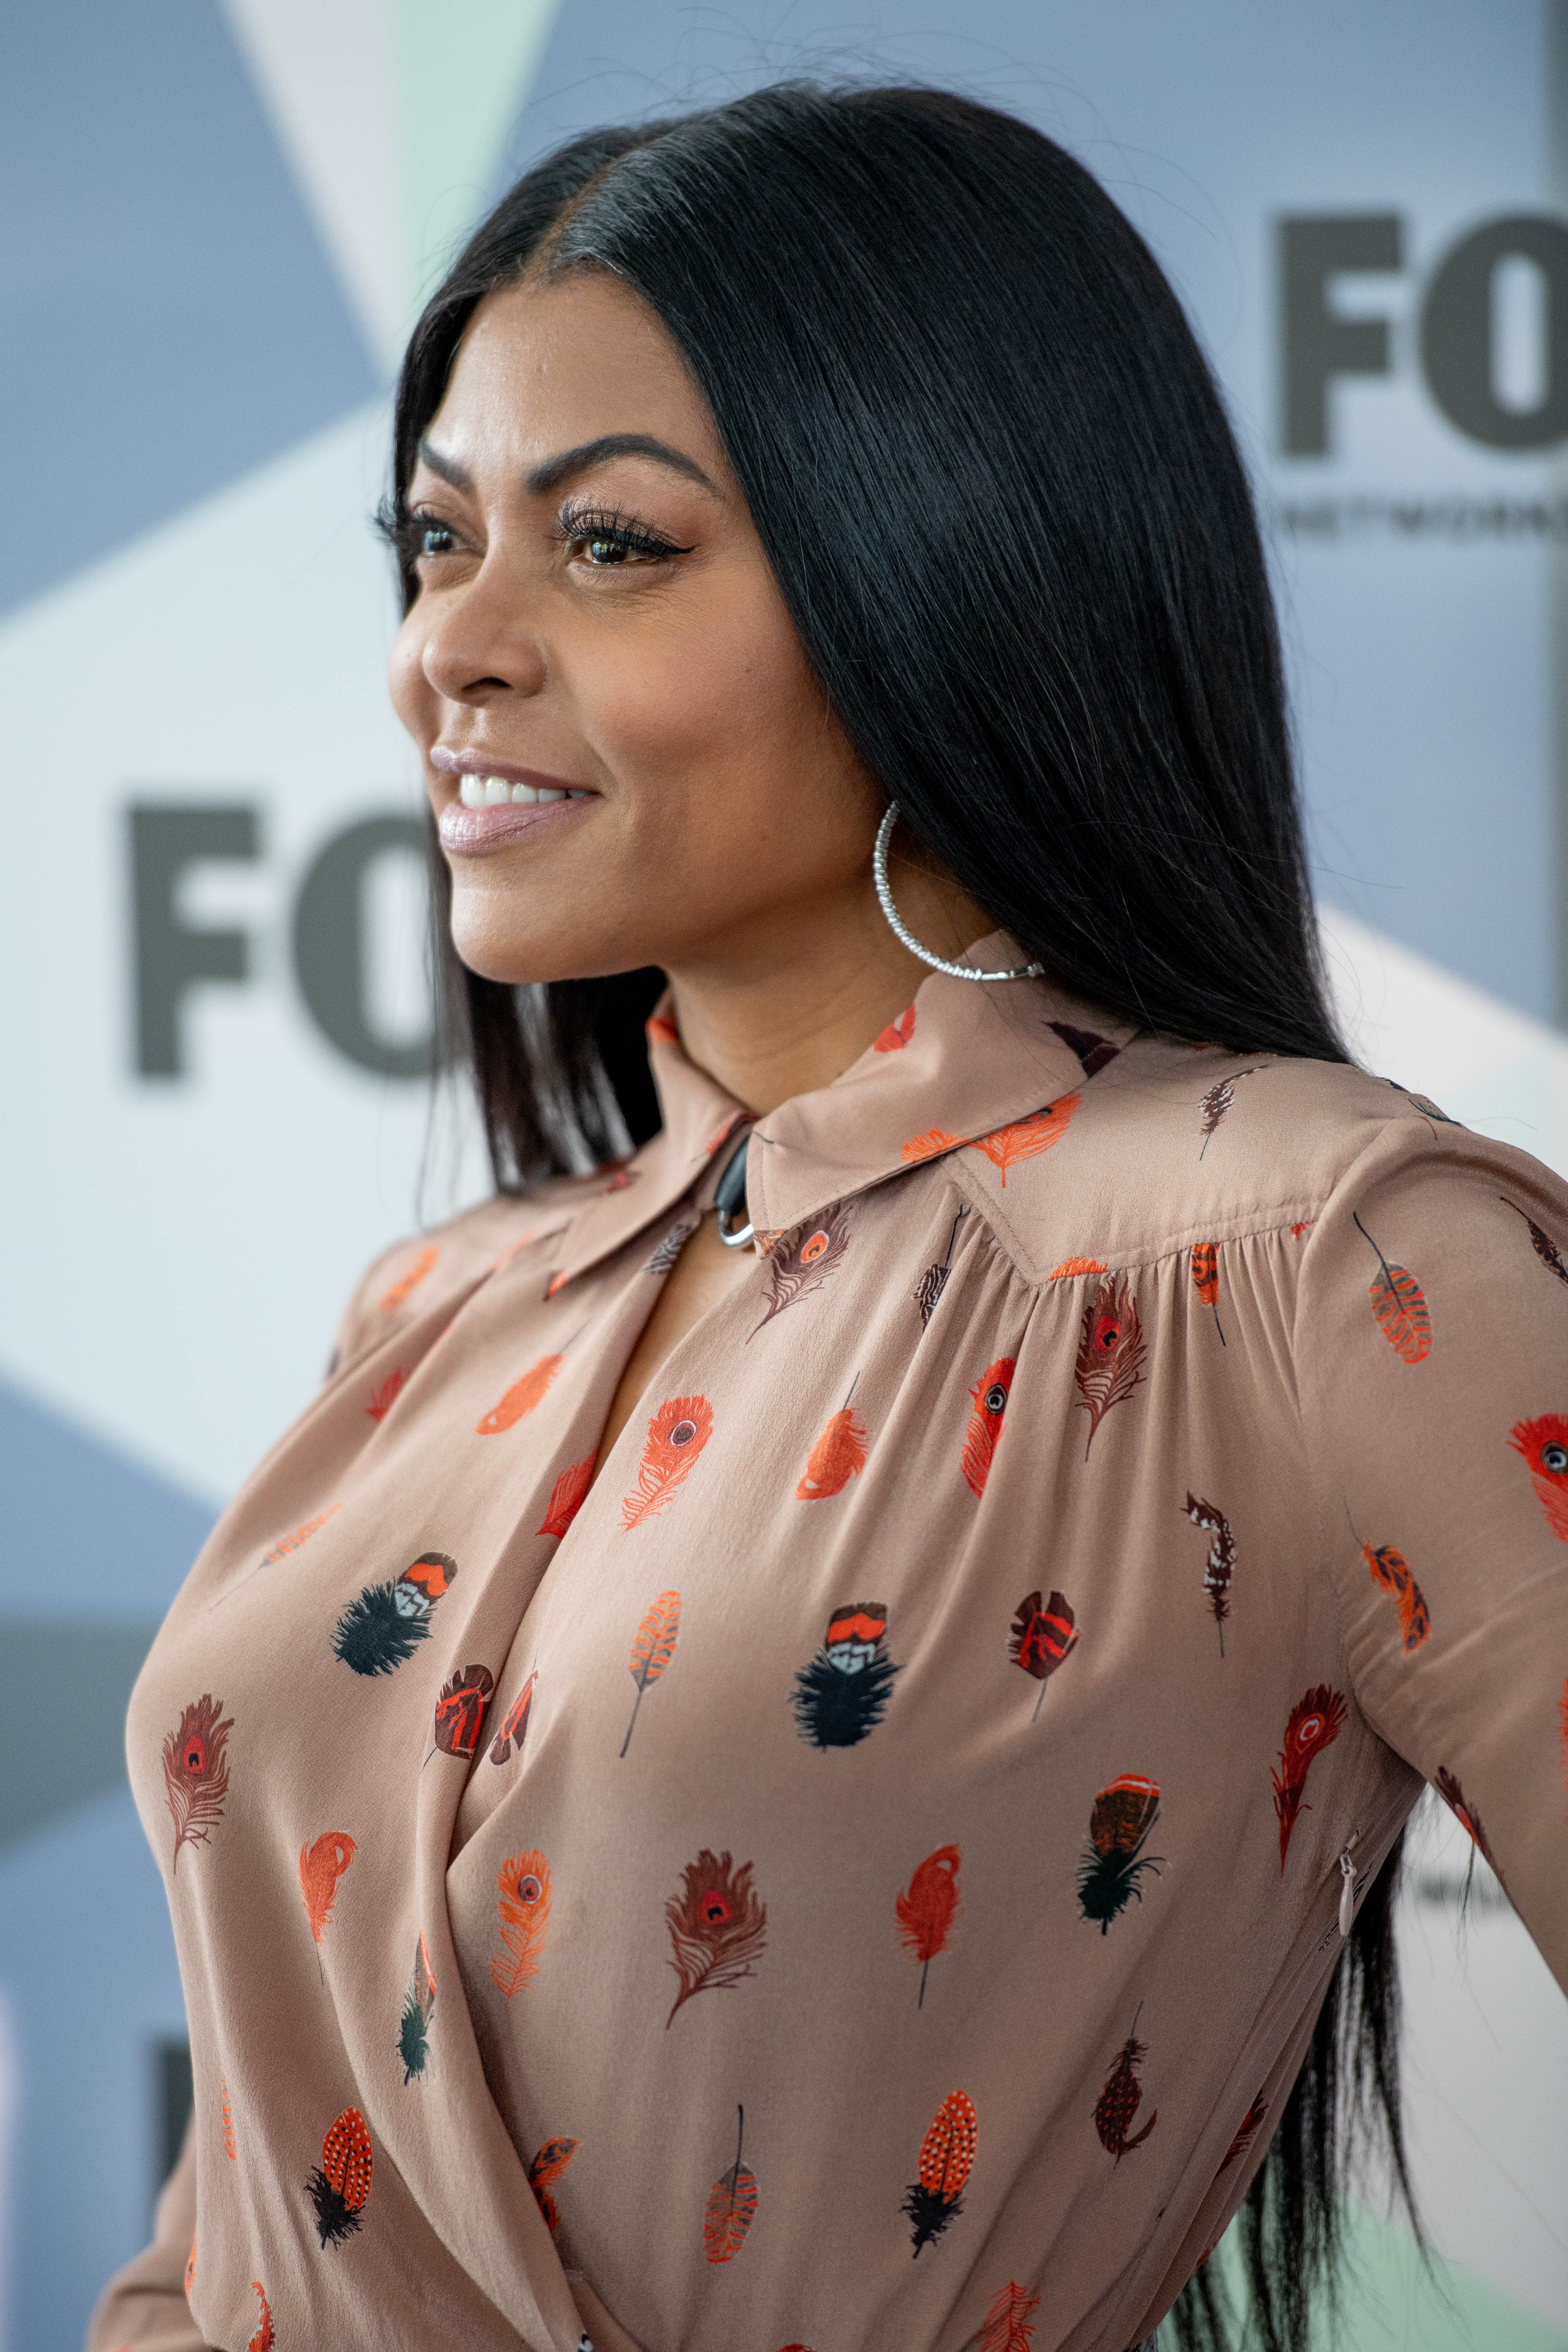 Taraji P. Henson attends the 2018 Fox Network Upfront at Wollman Rink, Central Park on May 14, 2018 in New York City. | Source: Getty Images